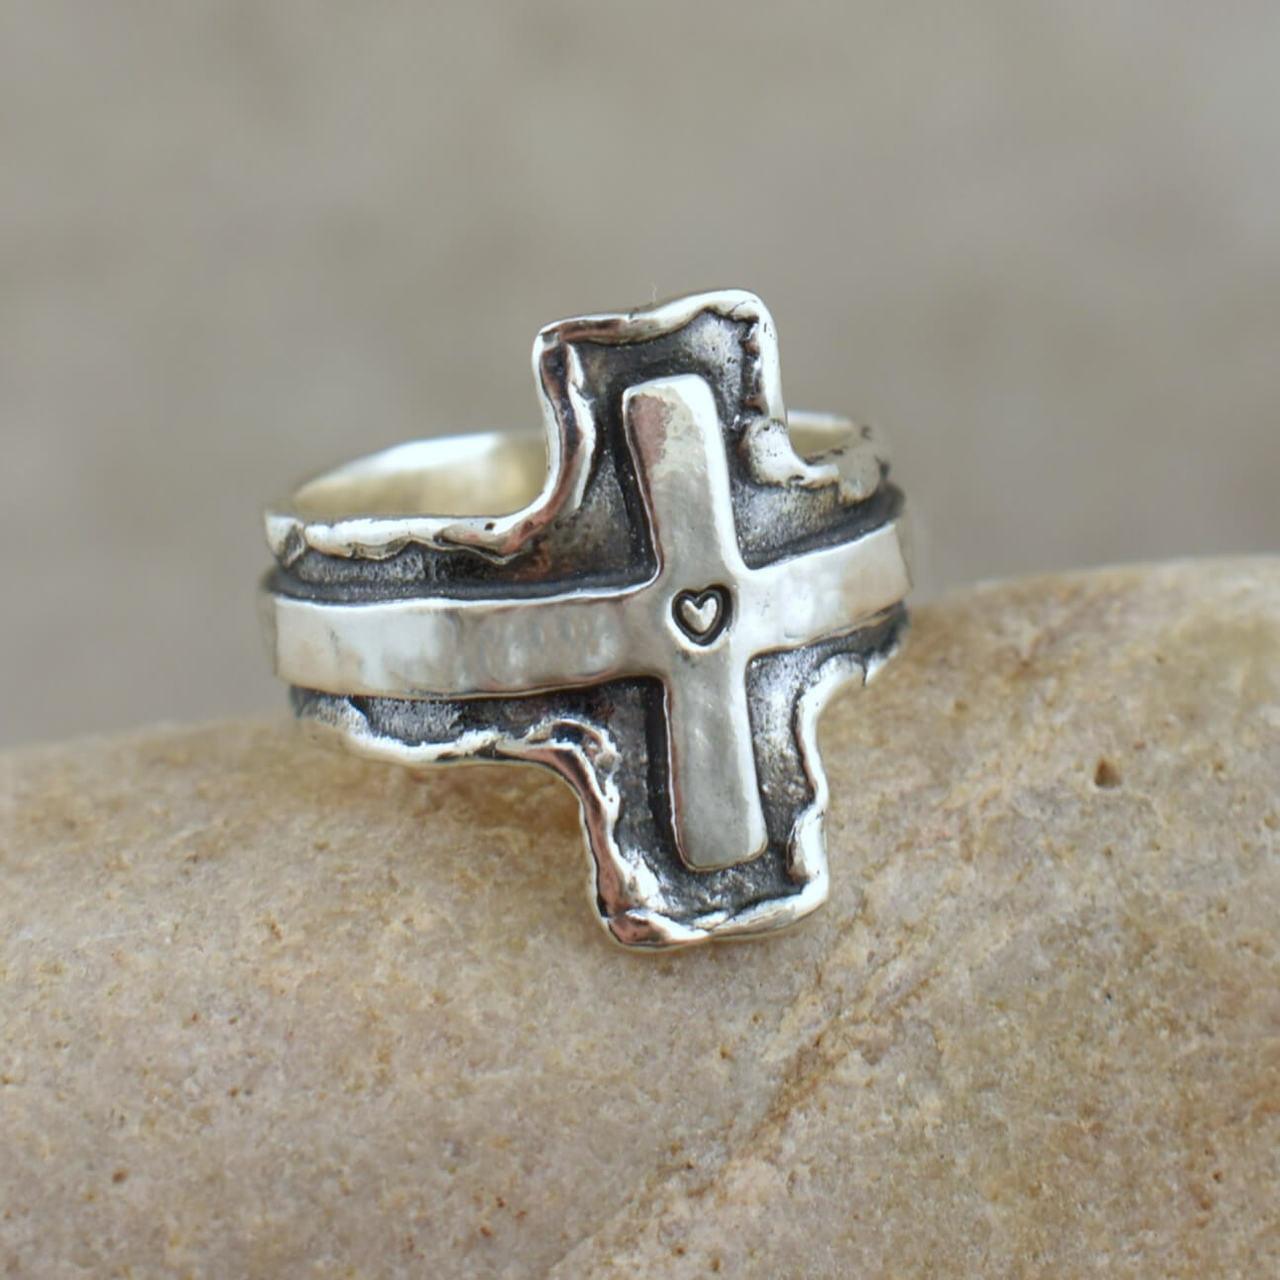 Designer ring with heart stamped in the middle